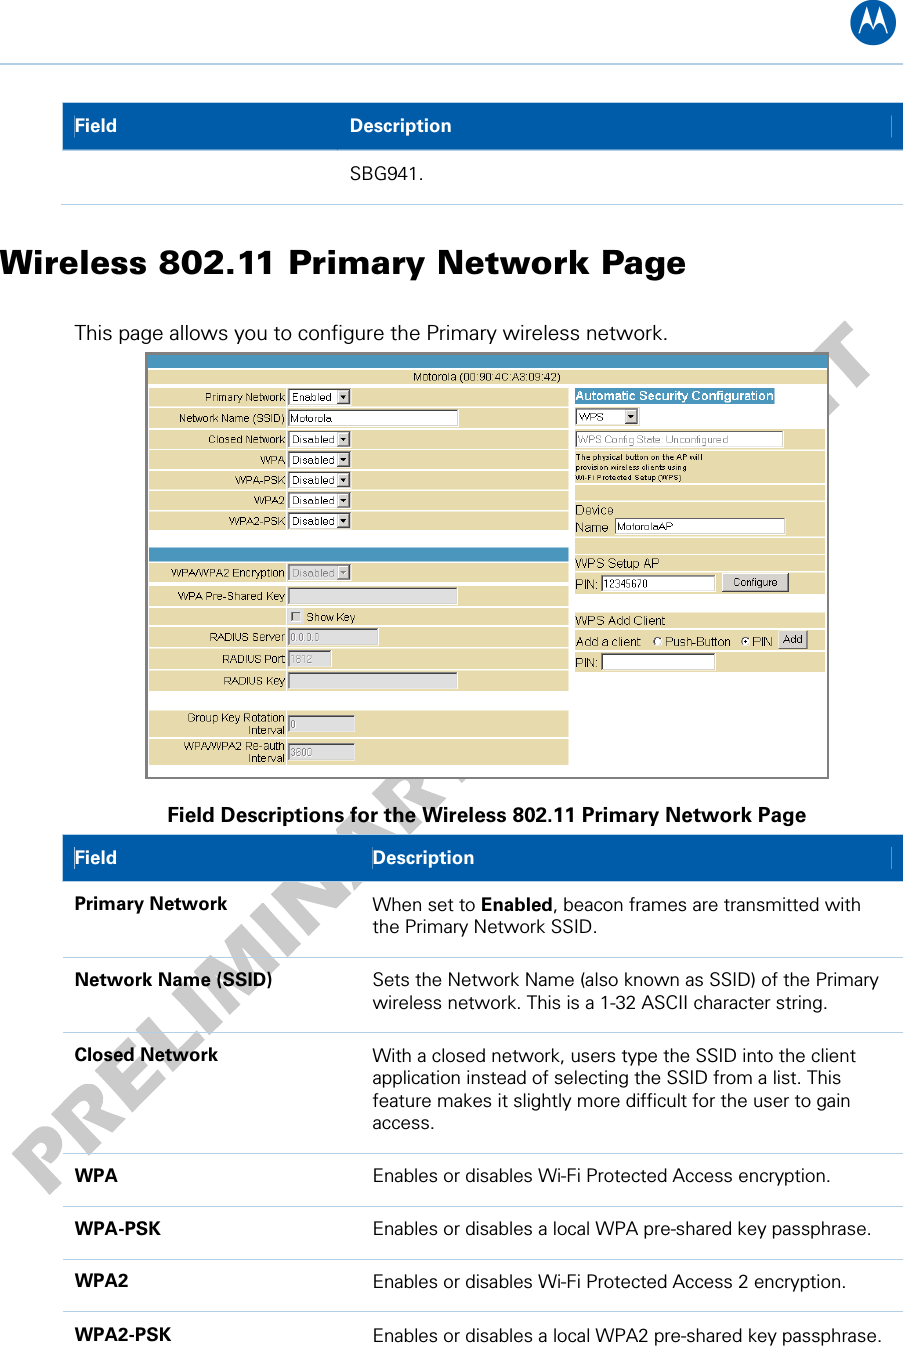 B Field   Description SBG941. Wireless 802.11 Primary Network Page This page allows you to configure the Primary wireless network.  Field Descriptions for the Wireless 802.11 Primary Network Page Field   Description Primary Network  When set to Enabled, beacon frames are transmitted with the Primary Network SSID. Network Name (SSID)  Sets the Network Name (also known as SSID) of the Primary wireless network. This is a 1-32 ASCII character string. Closed Network  With a closed network, users type the SSID into the client application instead of selecting the SSID from a list. This feature makes it slightly more difficult for the user to gain access. WPA  Enables or disables Wi-Fi Protected Access encryption. WPA-PSK  Enables or disables a local WPA pre-shared key passphrase. WPA2  Enables or disables Wi-Fi Protected Access 2 encryption. WPA2-PSK  Enables or disables a local WPA2 pre-shared key passphrase. 10 • Wireless Pages 53   